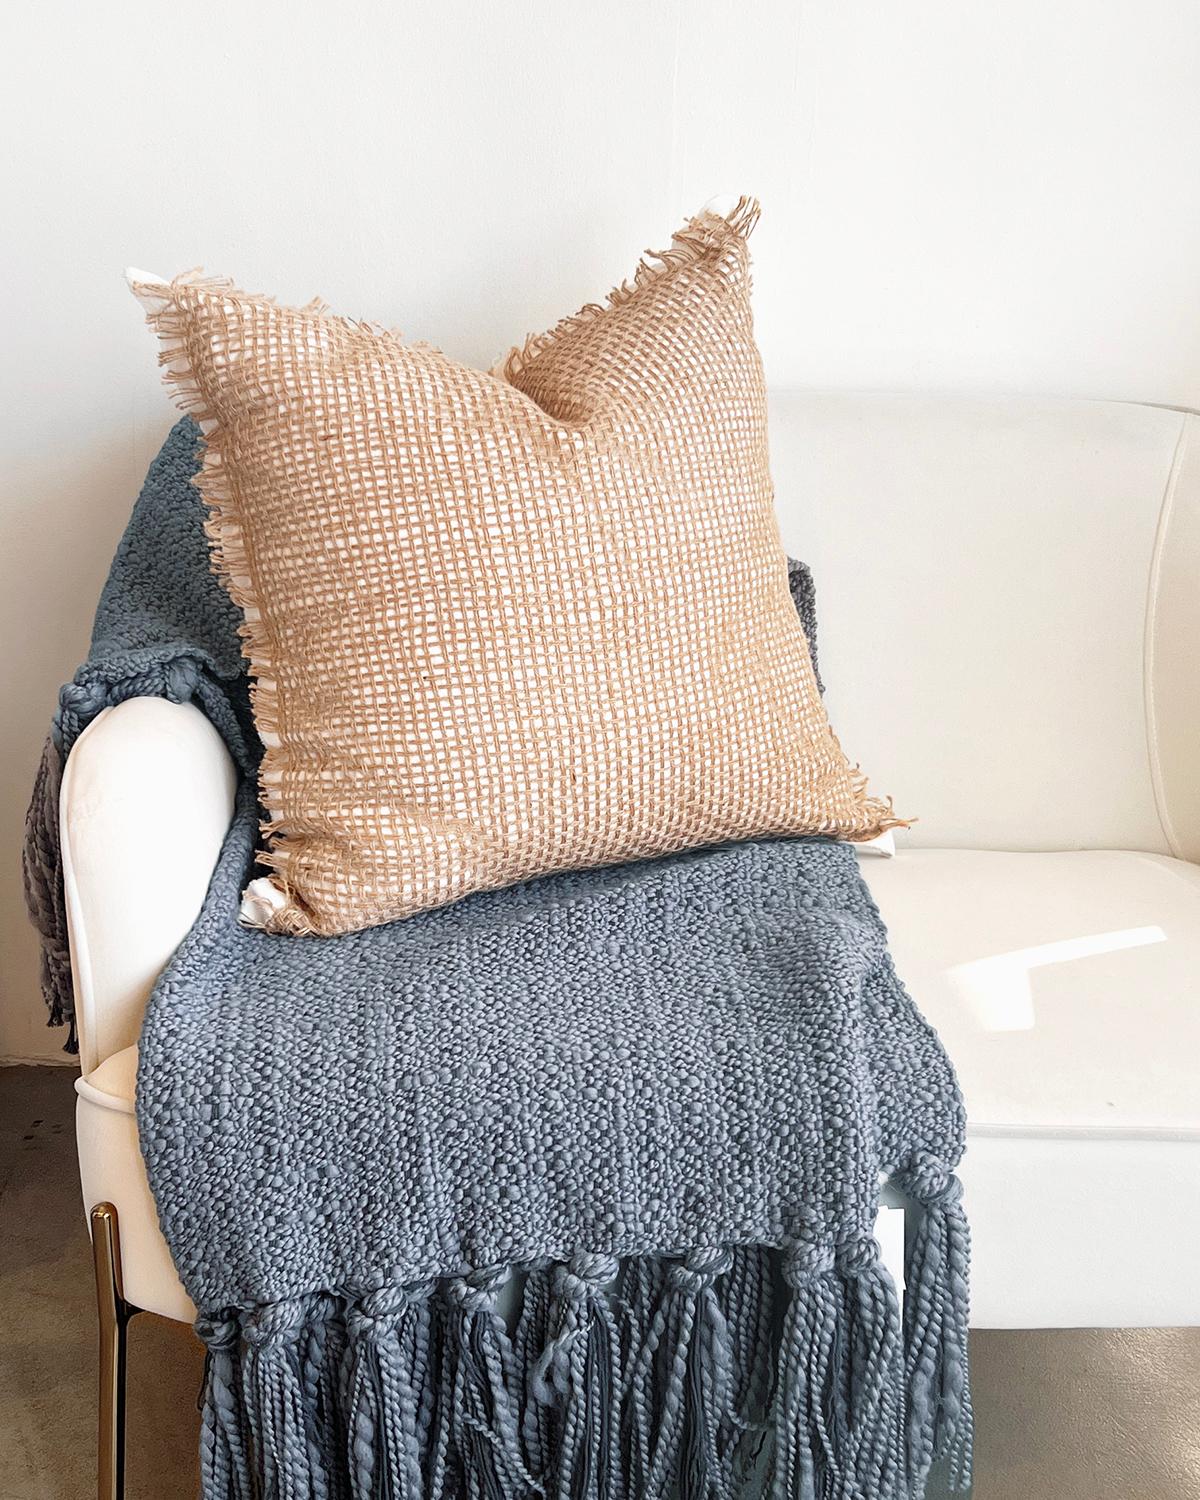 A rustic pillow for your couch. Add a touch of rustic charm to your home decor with our Tramas Linen & Jute Pillow. Featuring a linen and jute open weave, this throw pillow is perfect for any couch, chair, or bed. Perfect for country, boho, or